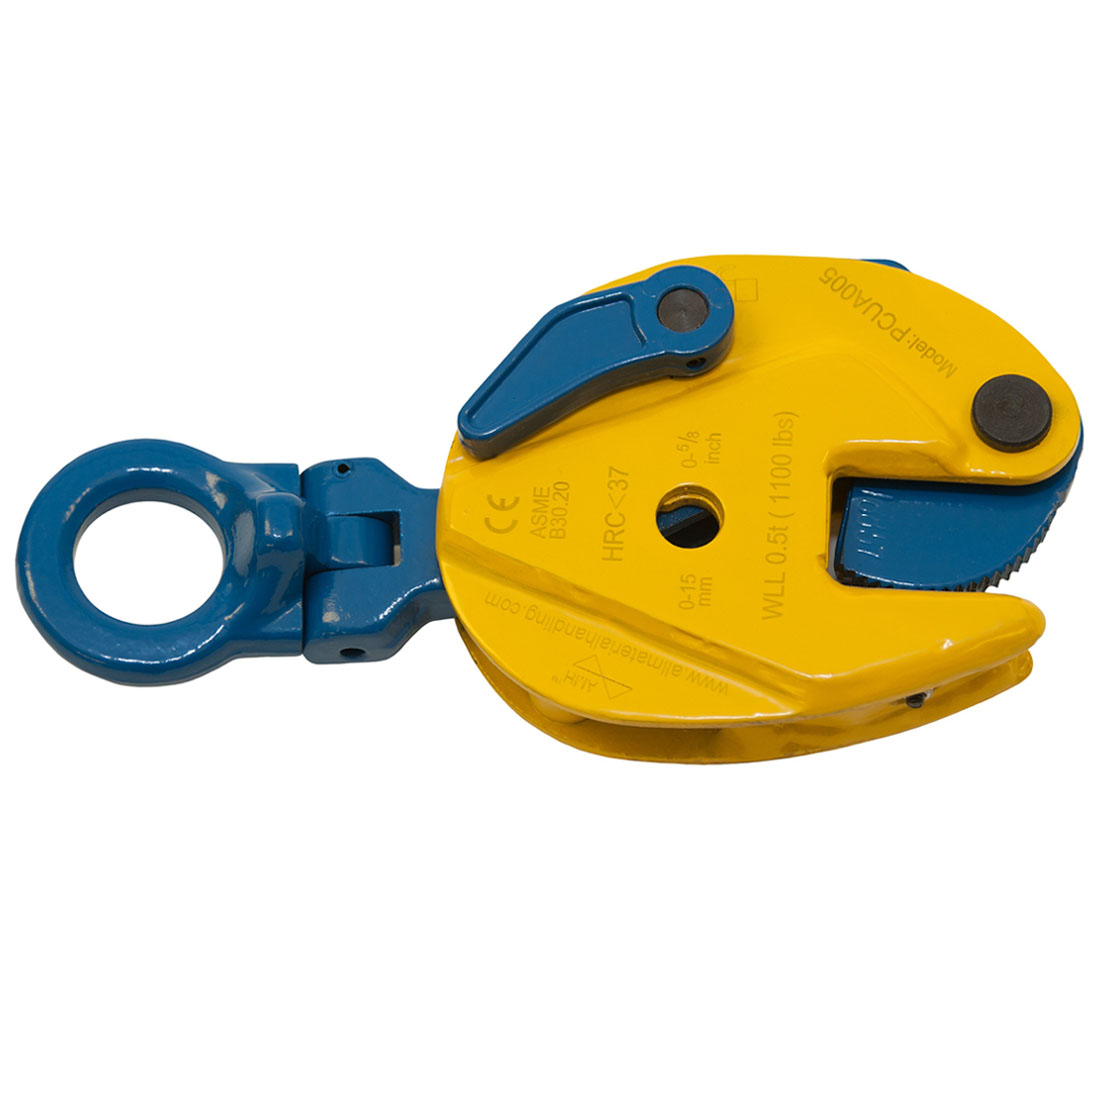 Plate Lifting Clamp, 1 Inch Jaw Opening, 4400 lbs Capacity